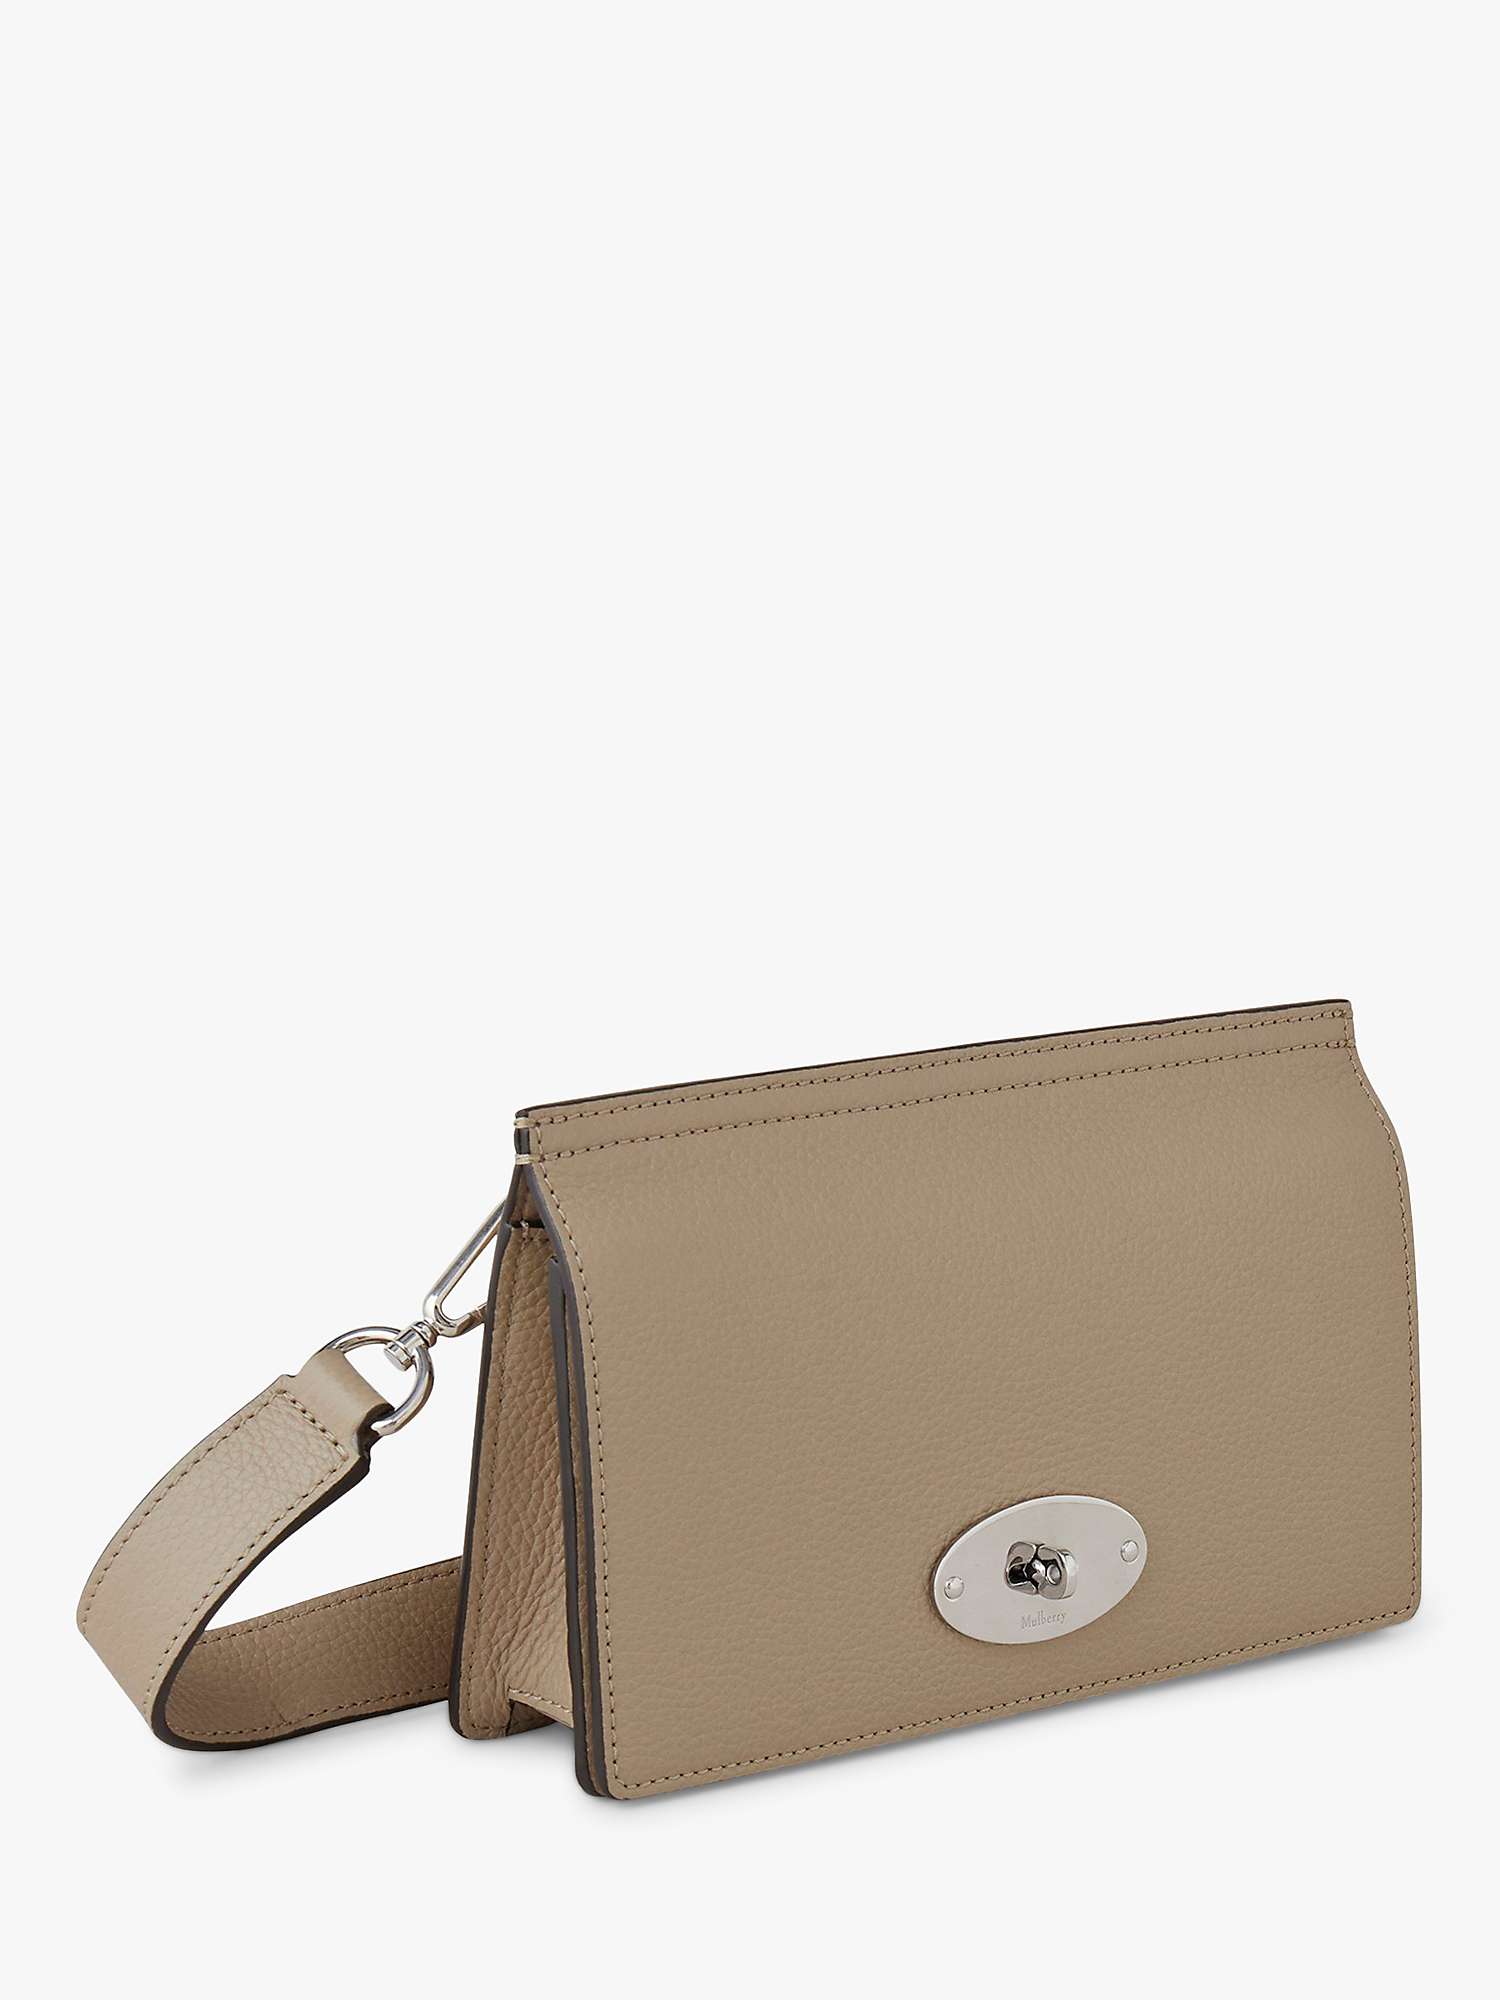 Buy Mulberry East West Antony Small Classic Grain Leather Crossbody Bag, Dune Online at johnlewis.com